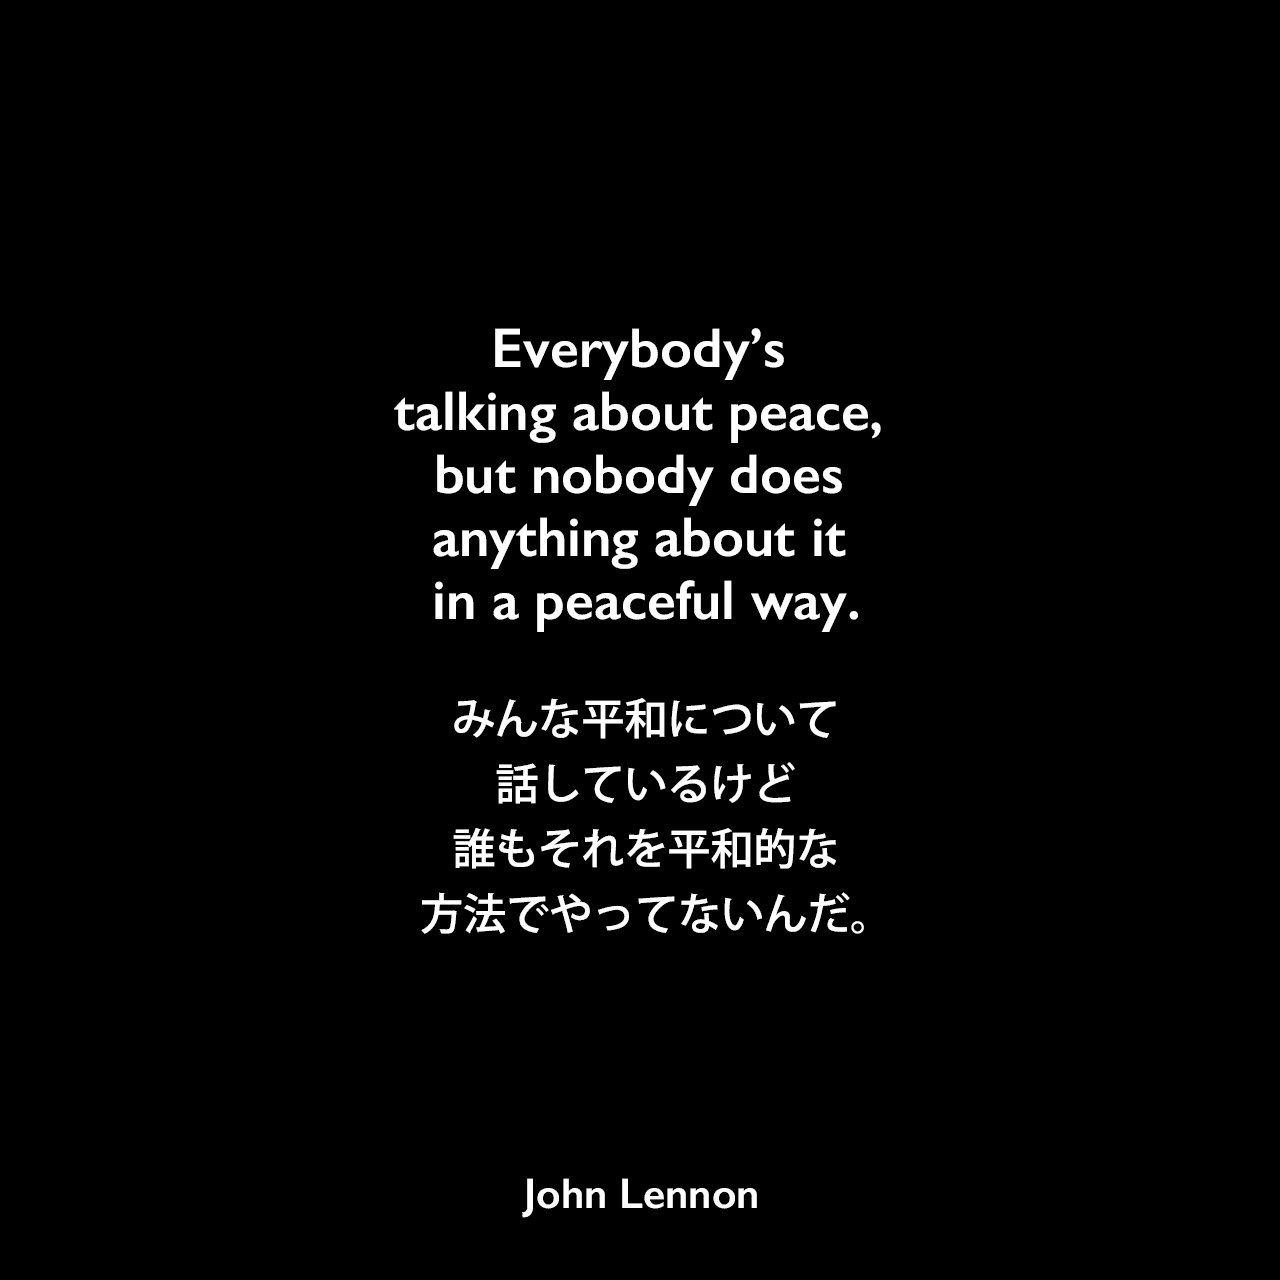 Everybody’s talking about peace, but nobody does anything about it in a peaceful way.みんな平和について話しているけど、誰もそれを平和的な方法でやってないんだ。John Lennon